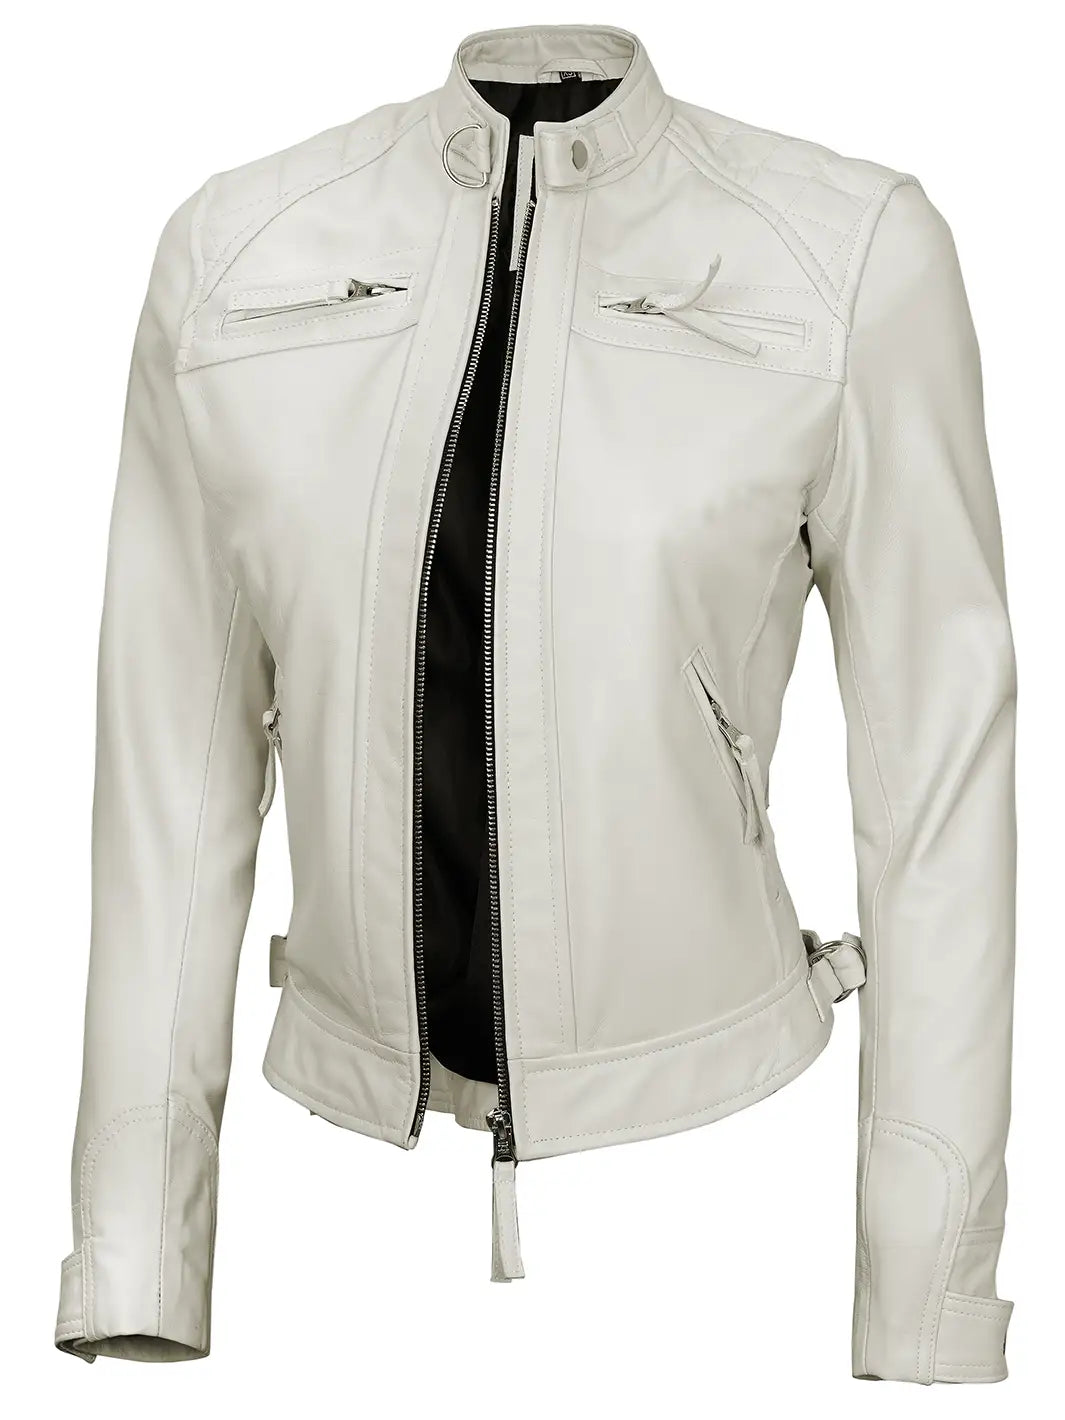 Womens leather jacket off white